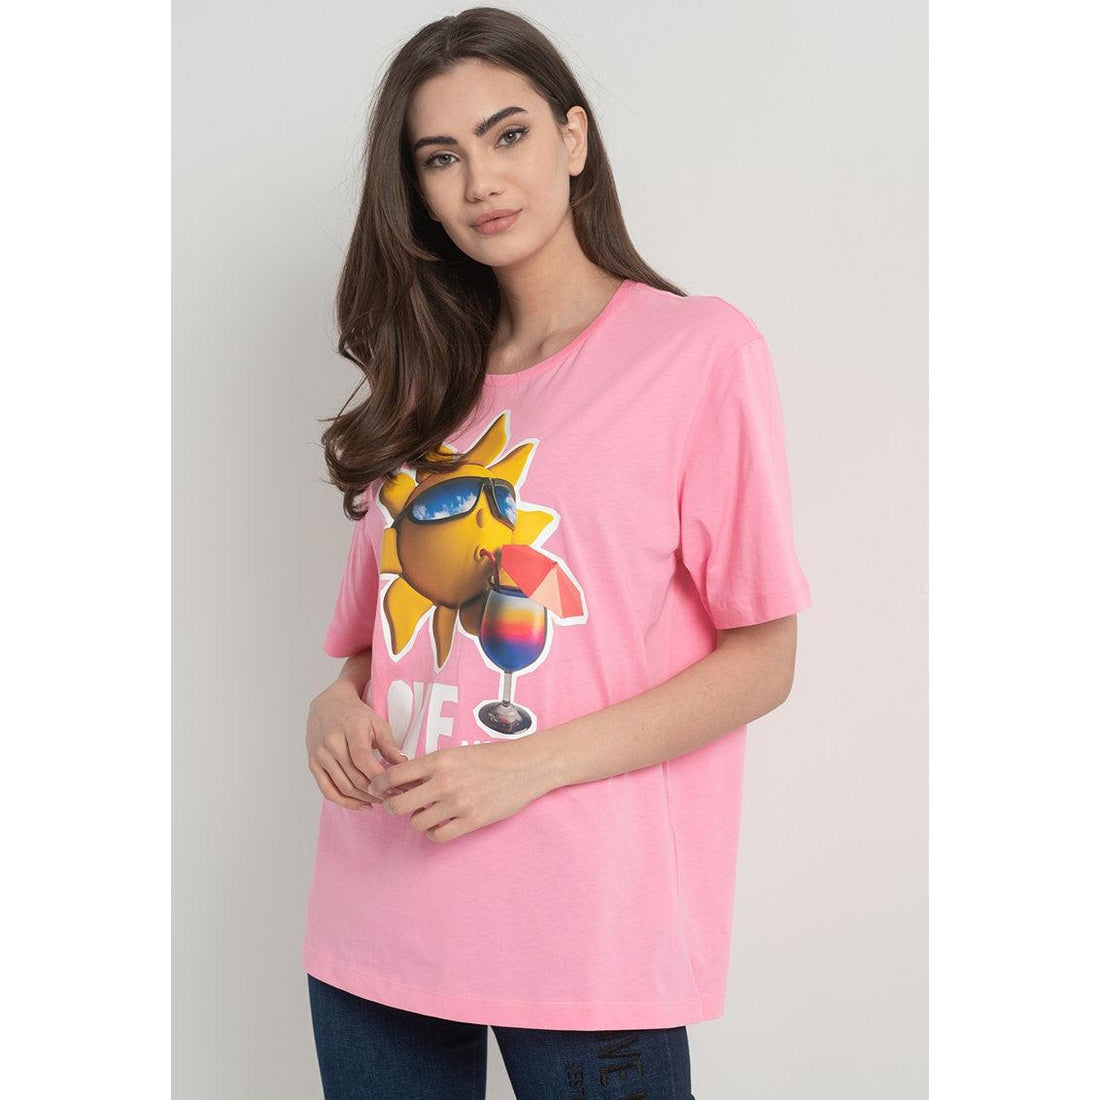 Love Moschino Chic Logo Print Cotton Tee in Pink